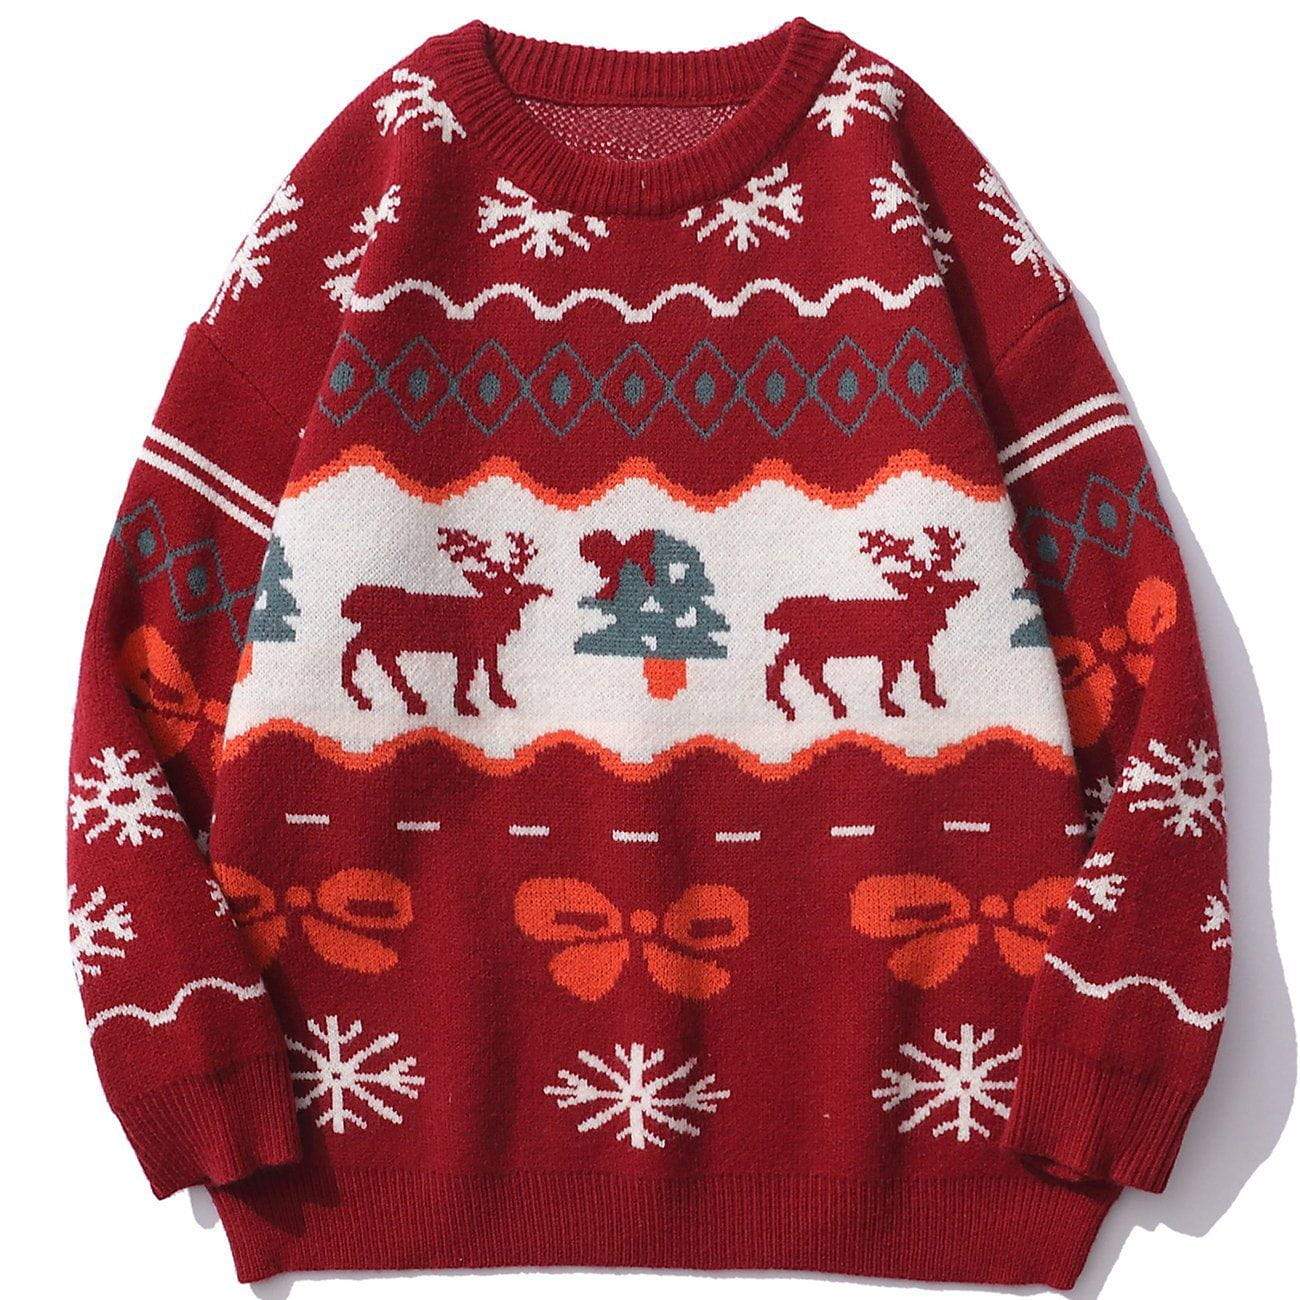 CHRISTMAS ELK PATTERN KNITTED SWEATER